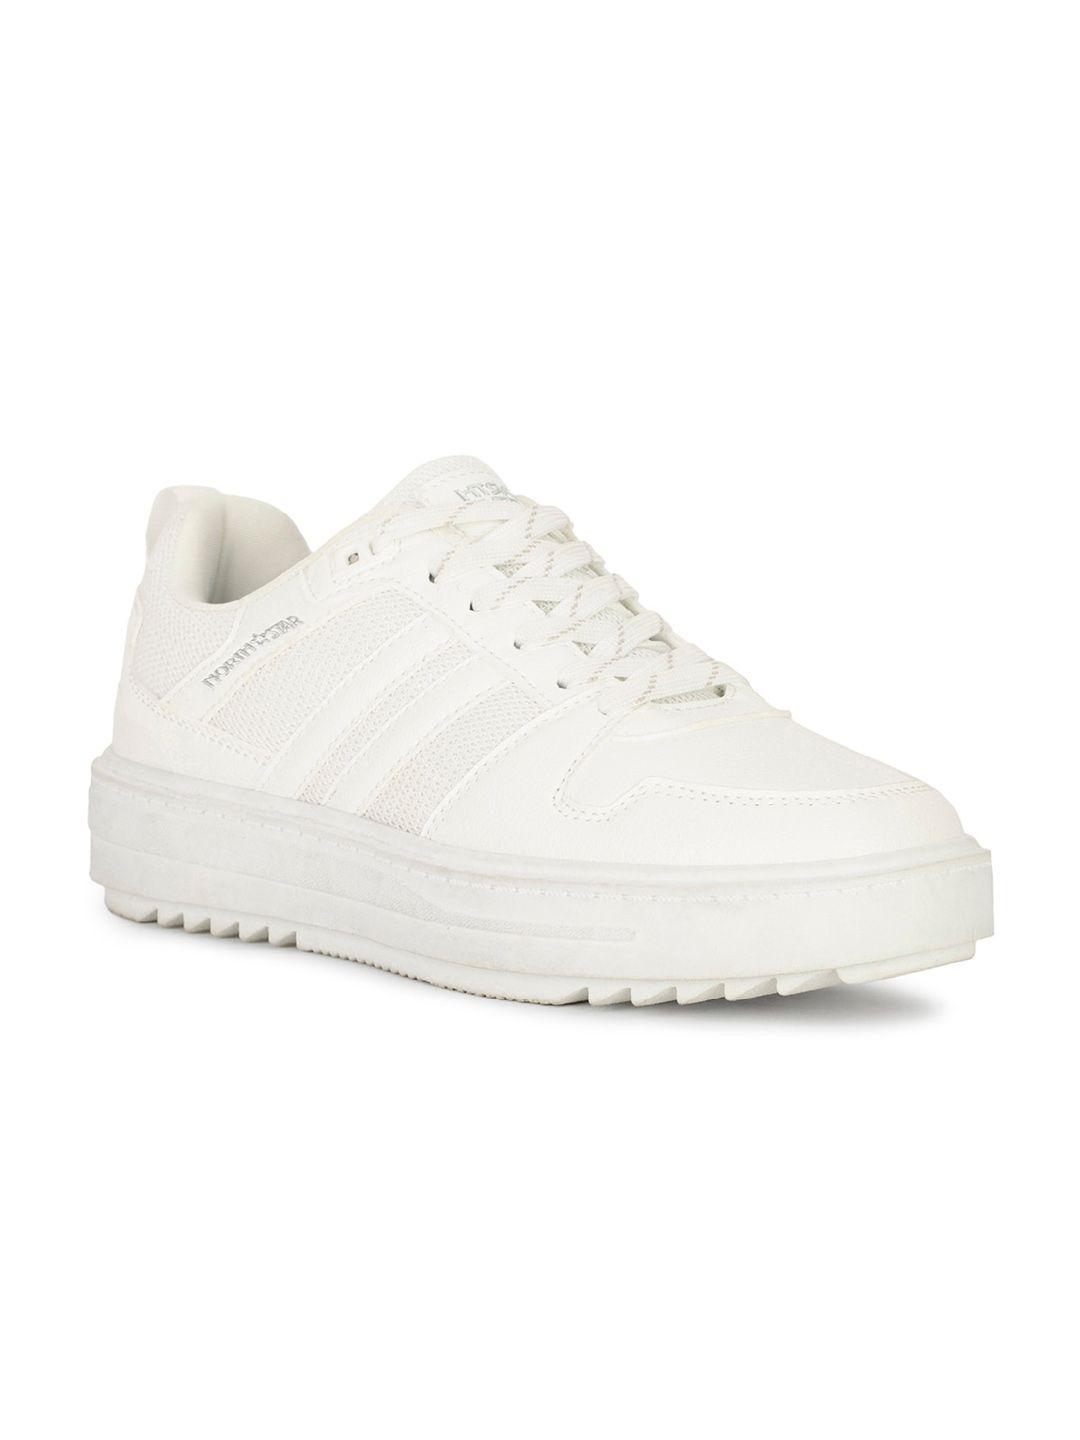 north star women textured replay sneakers